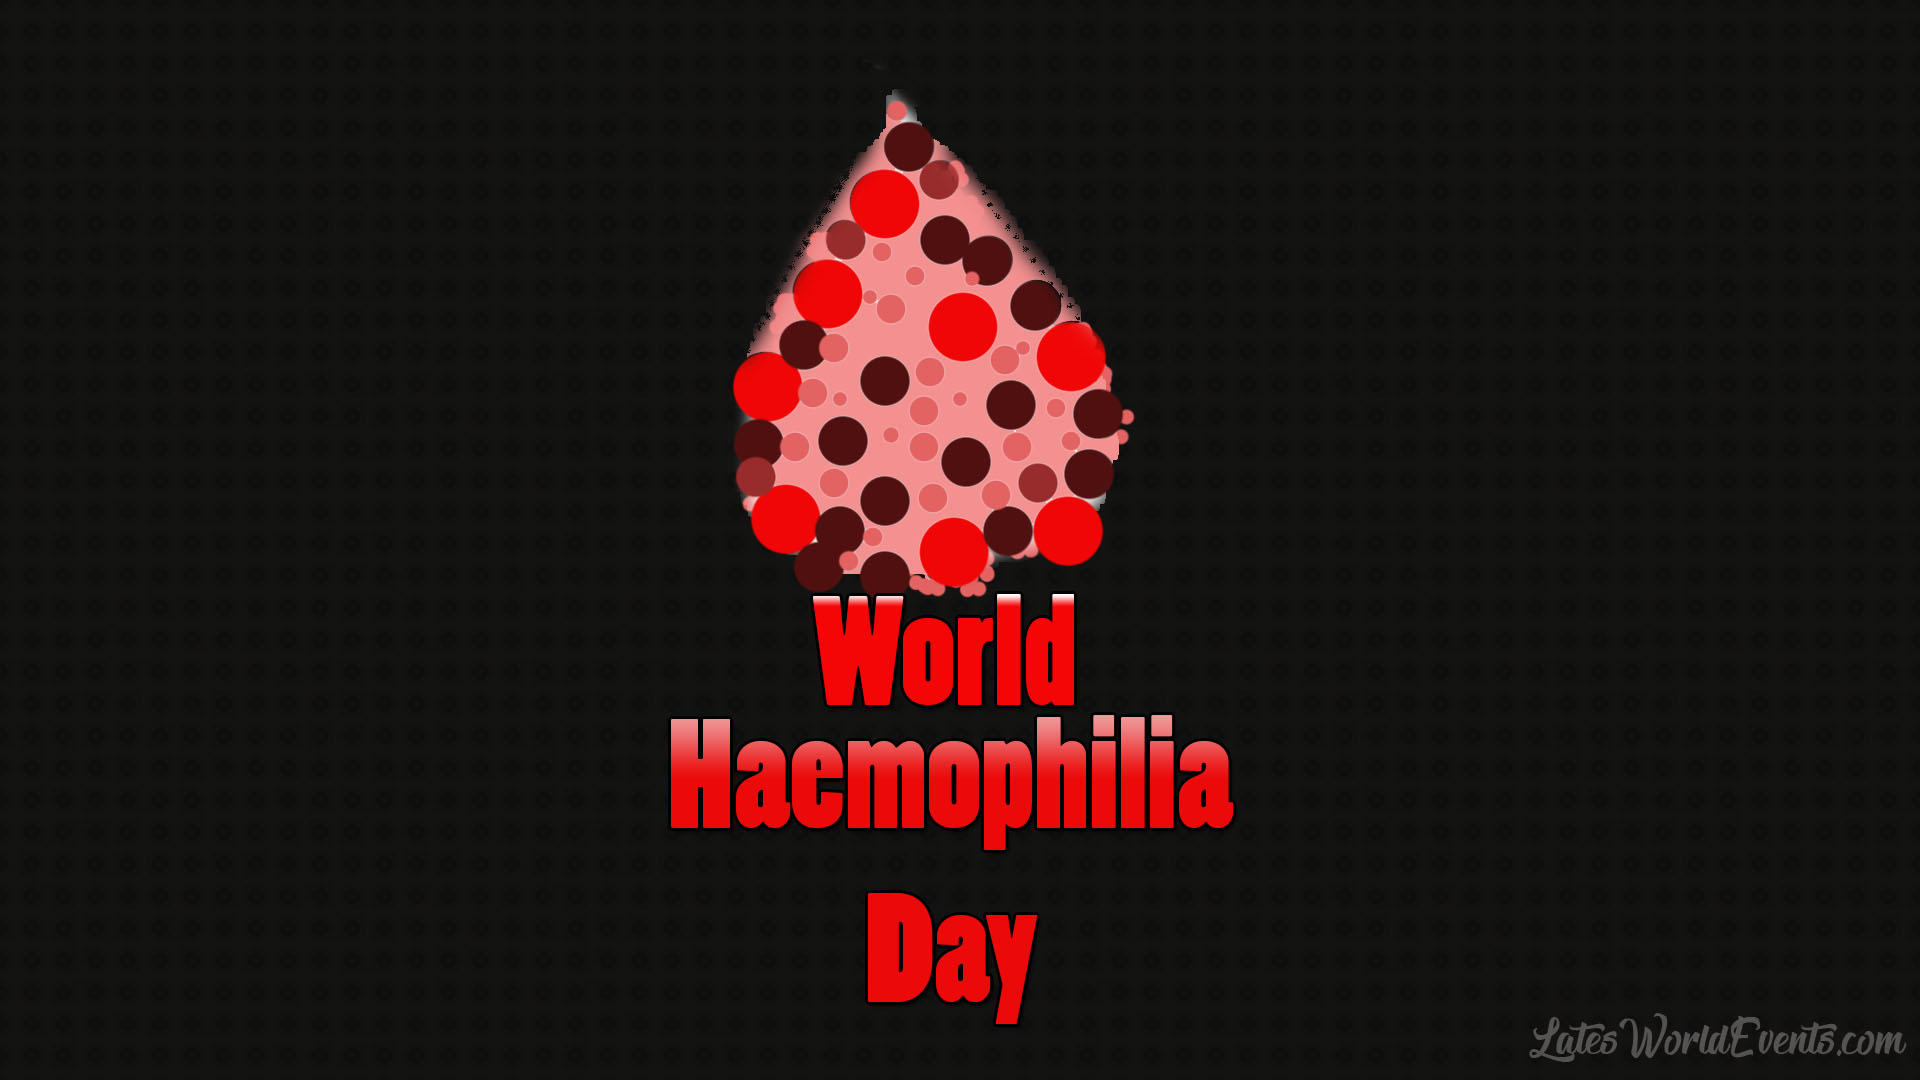 world-heamophilia-day-poster-2020